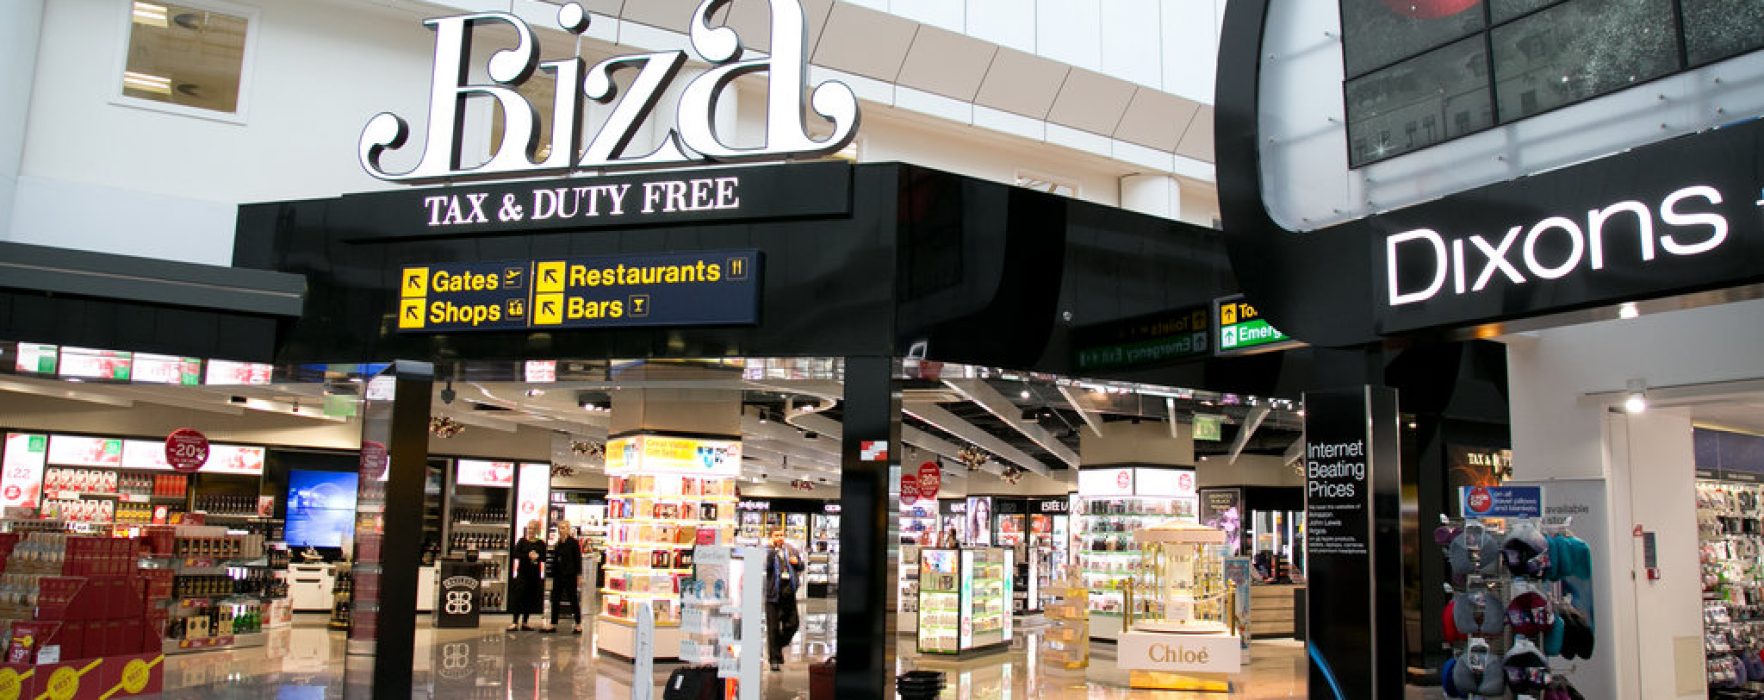 Manchester Airport Terminal 1 Food Outlets